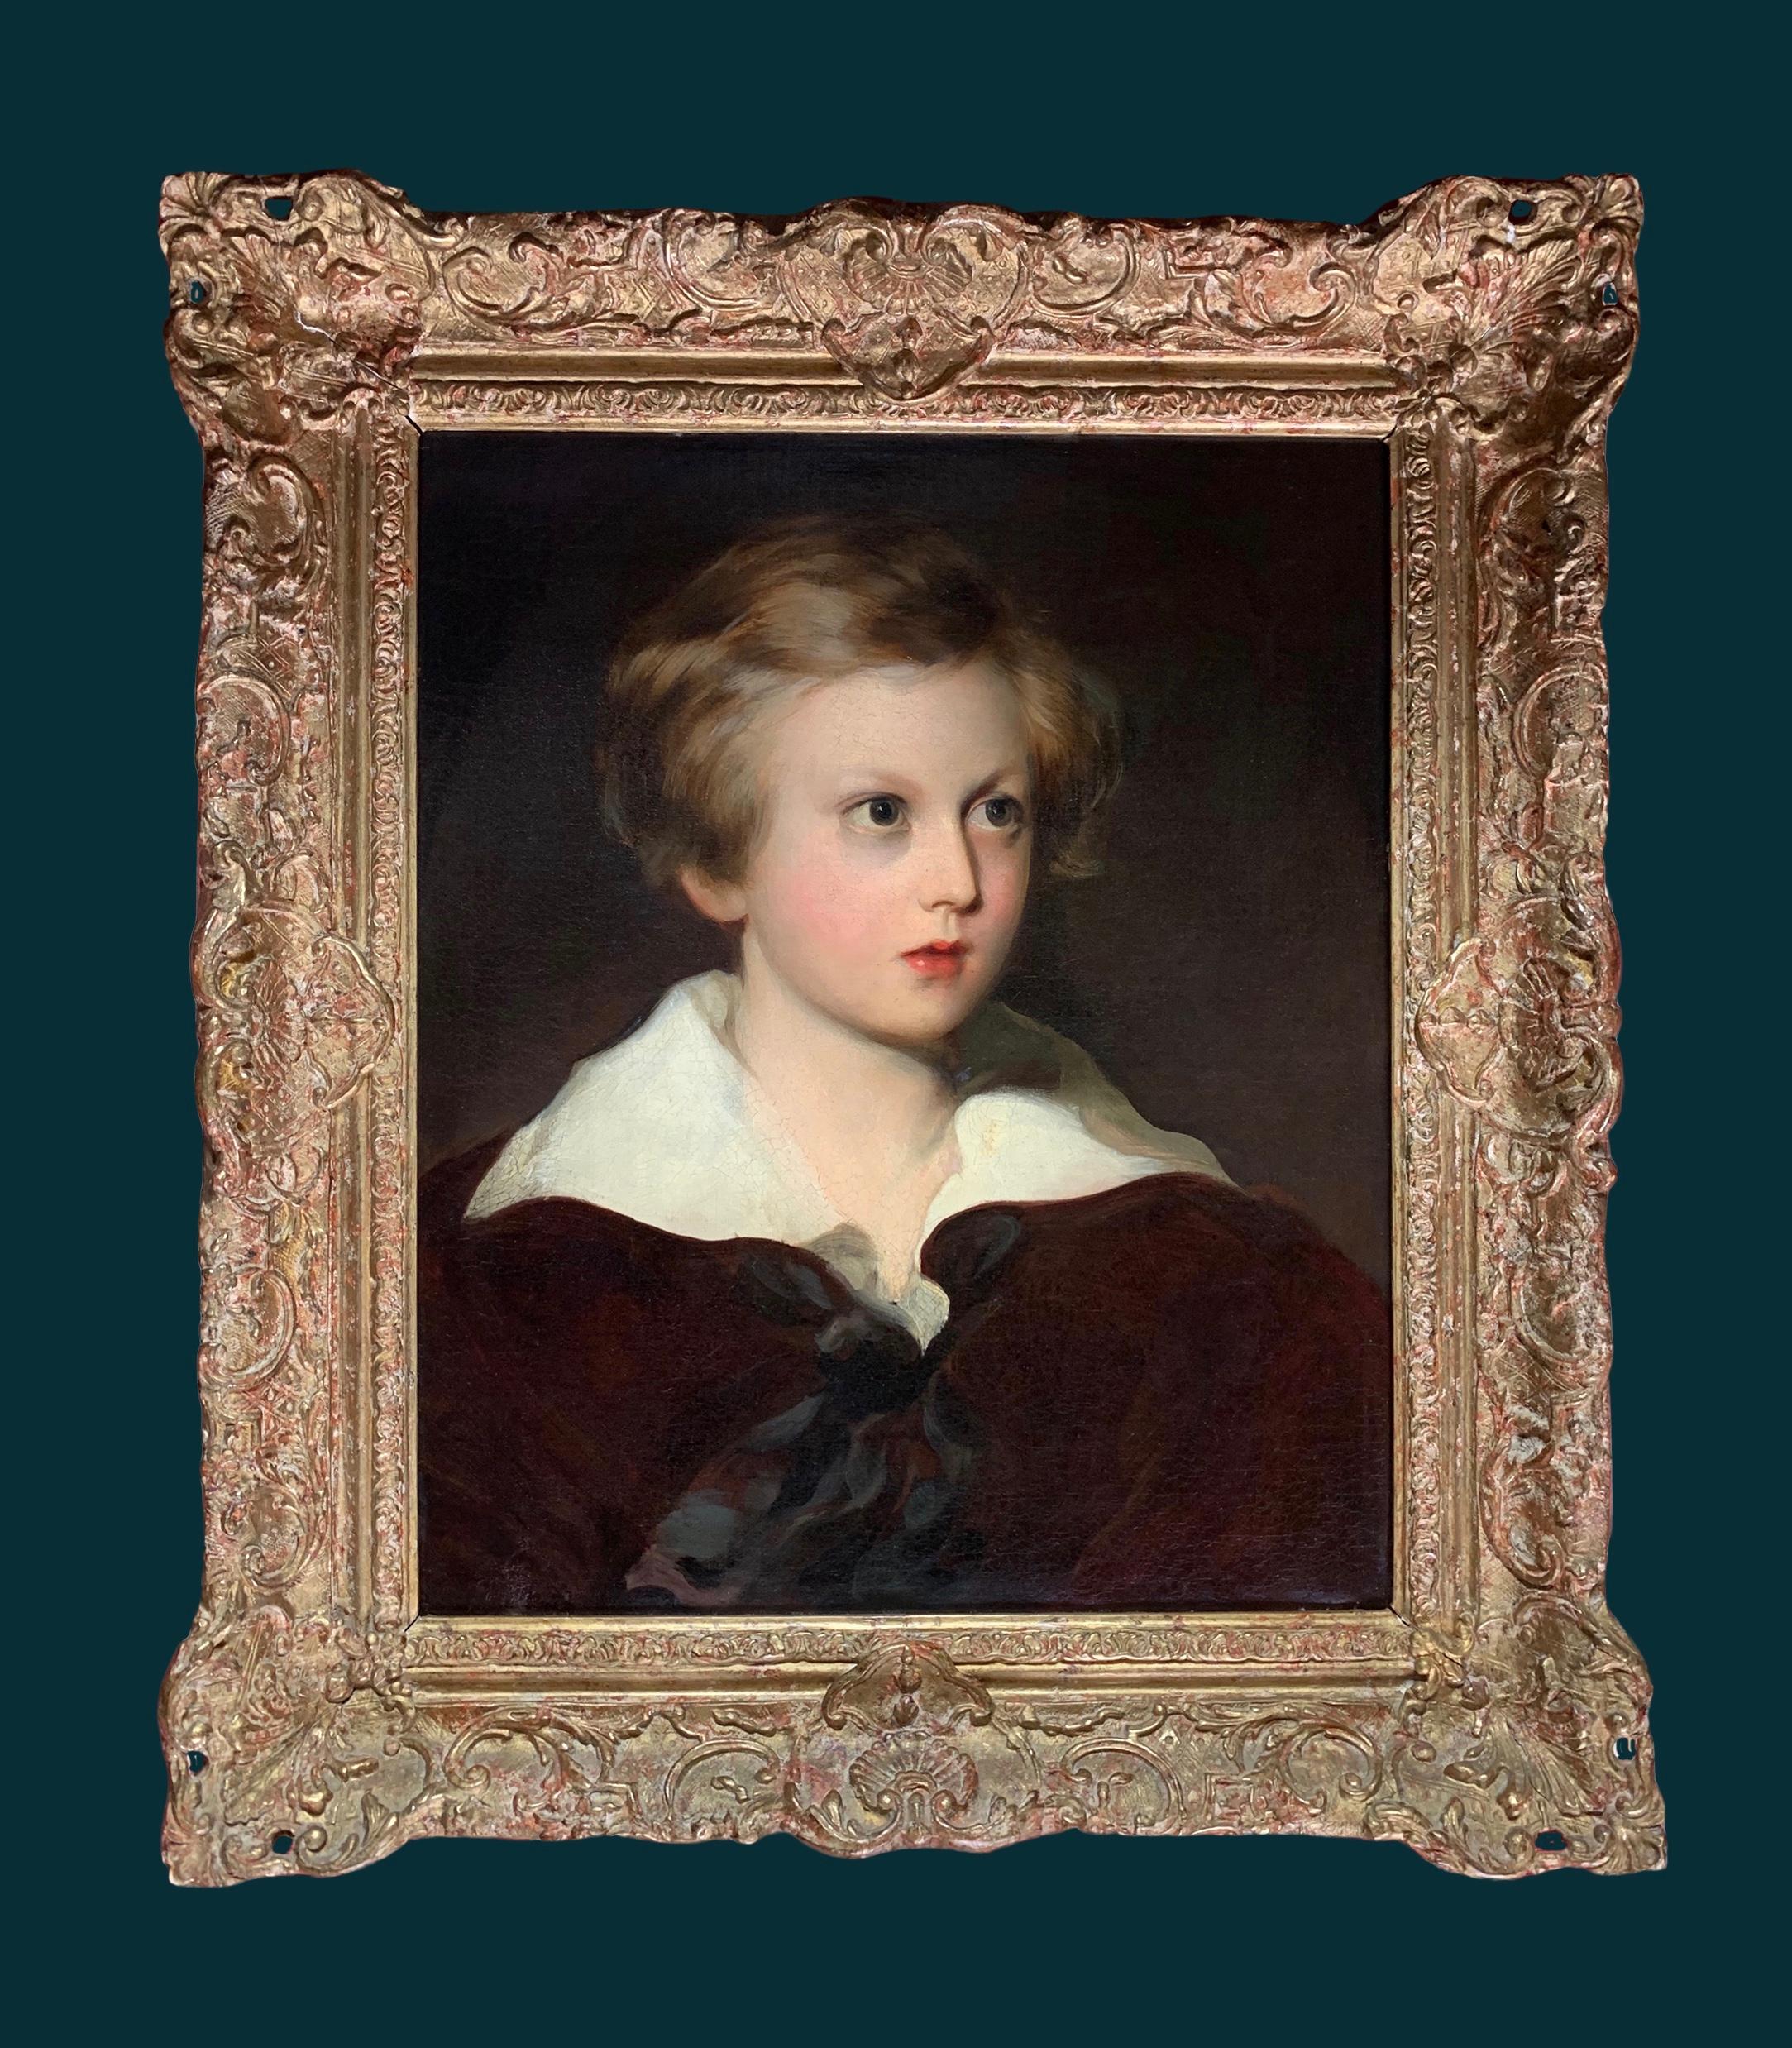 19th Century English Oil on Canvas Portrait of a Young Boy (Master Fletcher) - Old Masters Painting by George Henry Harlow